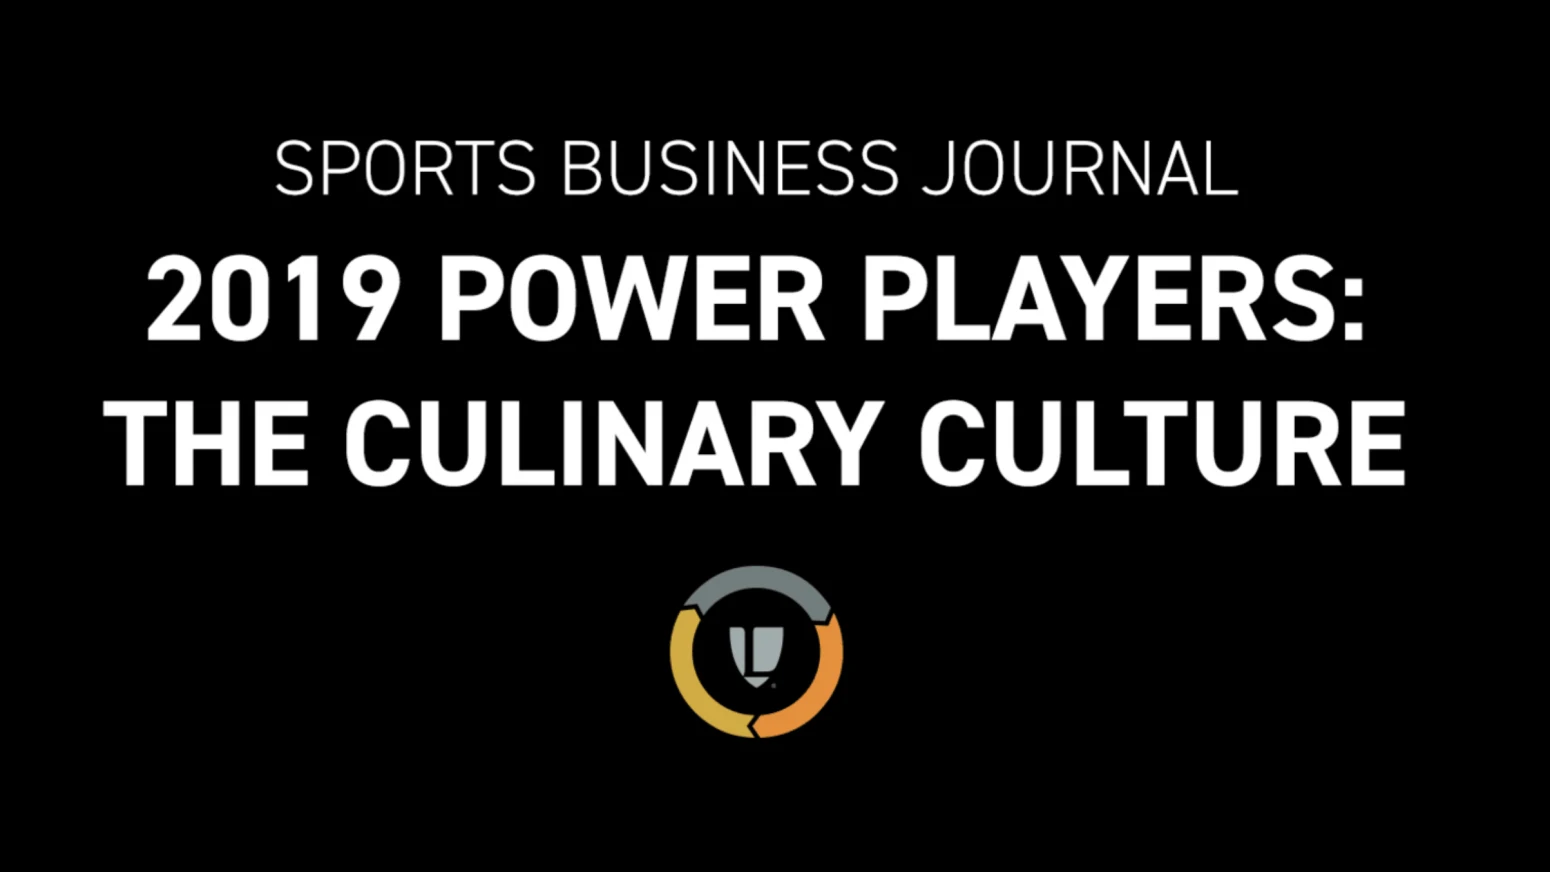 SPORTS BUSINESS JOURNAL HONOURS LEGENDS’ POWER PLAYERS